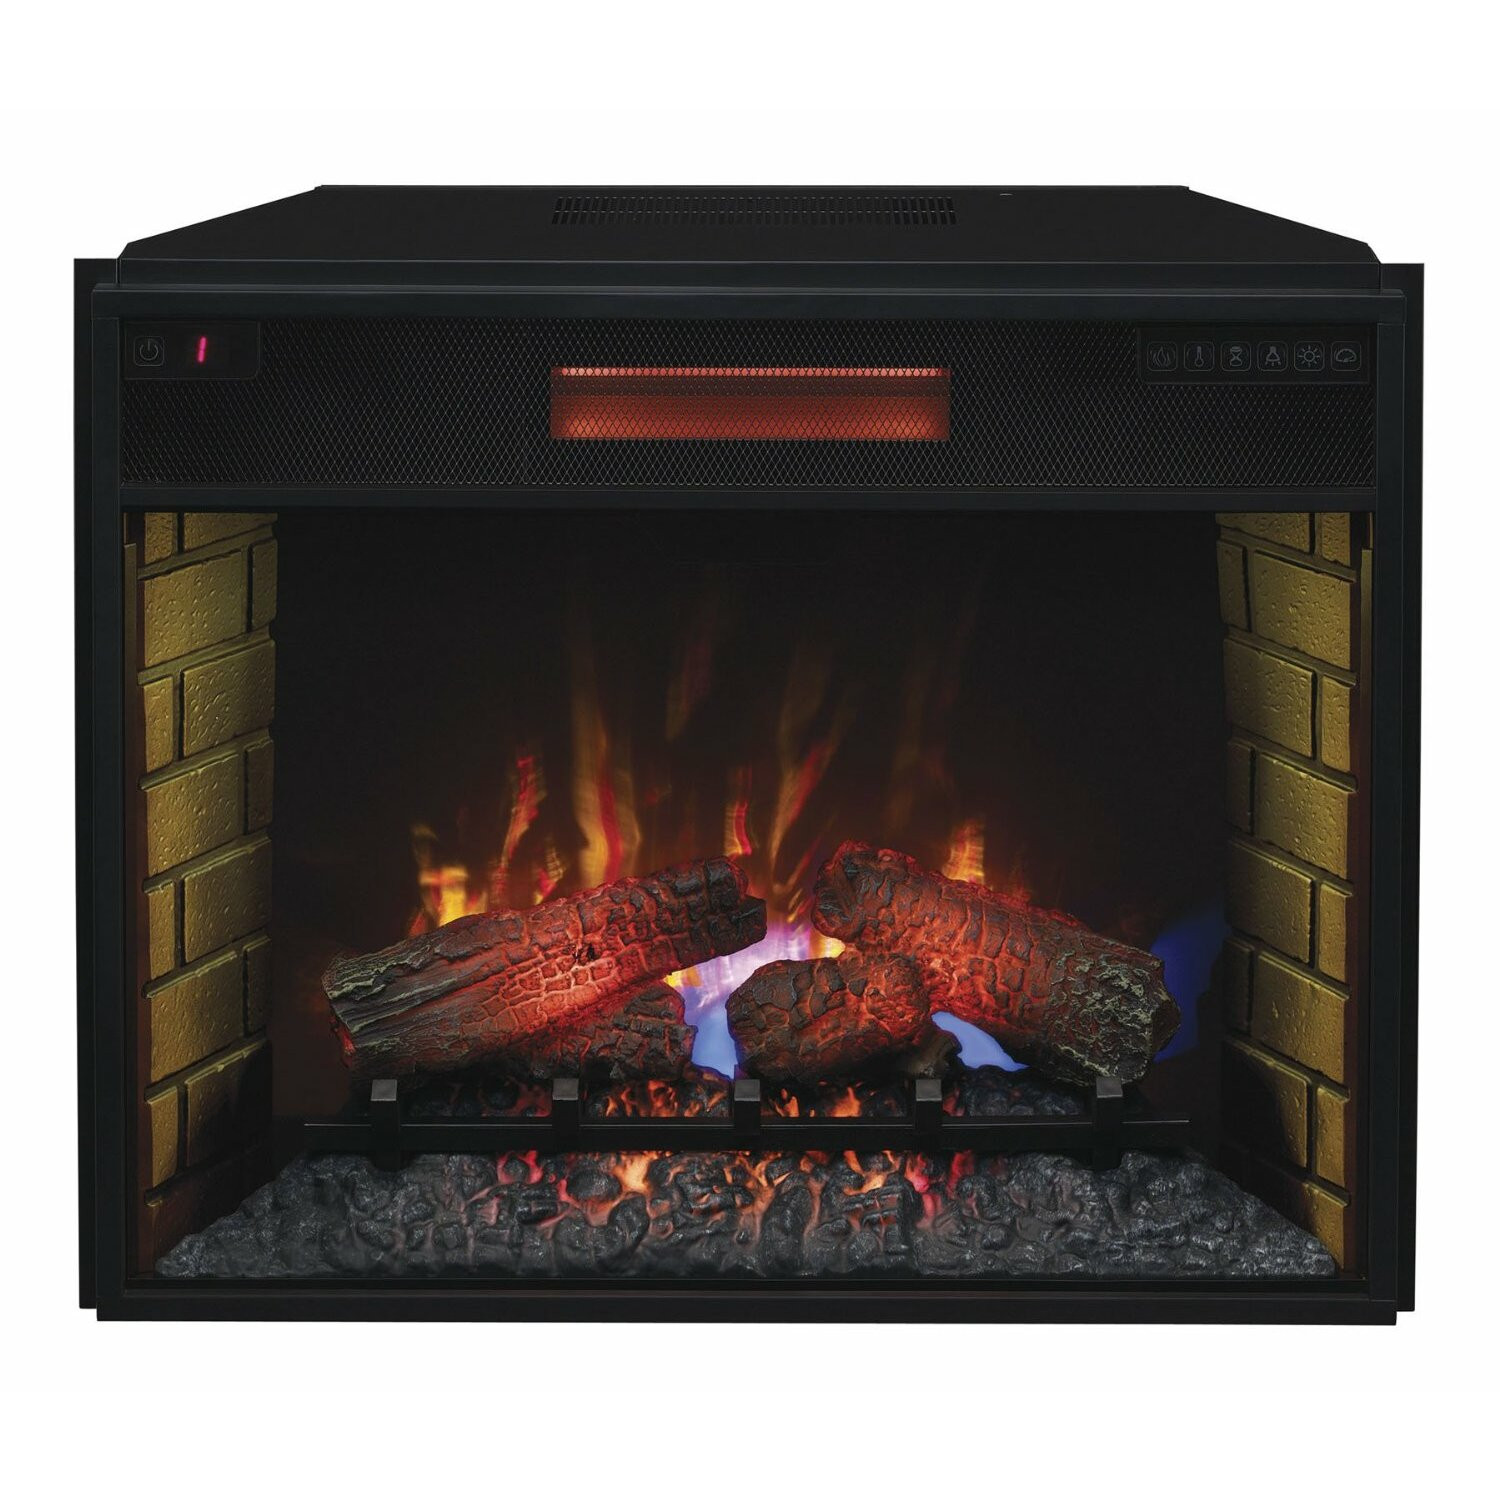 Classicflame Electric Fireplace Insert
 Classic Flame Lakeland TV Stand Electric Fireplace Insert